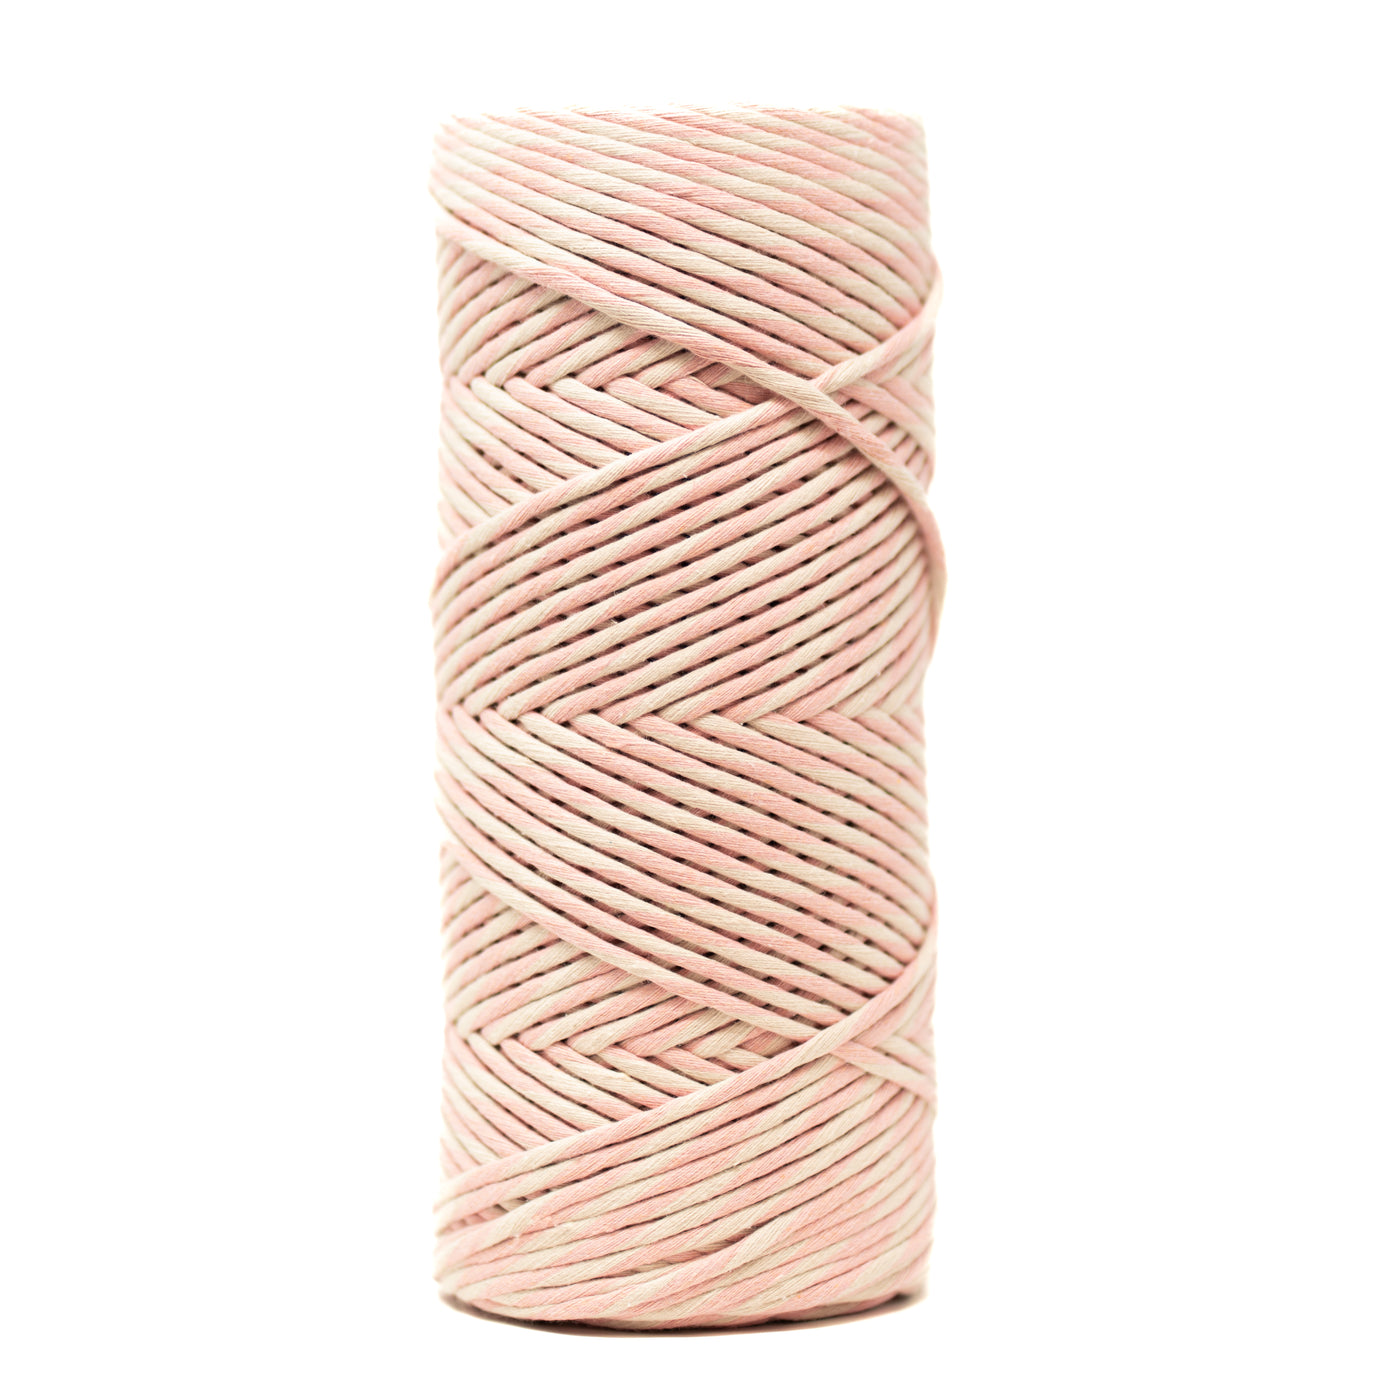 DUAL RECYCLED COTTON MACRAME CORD 4 MM - SINGLE STRAND - PALE PINK + ALMOND COLOR